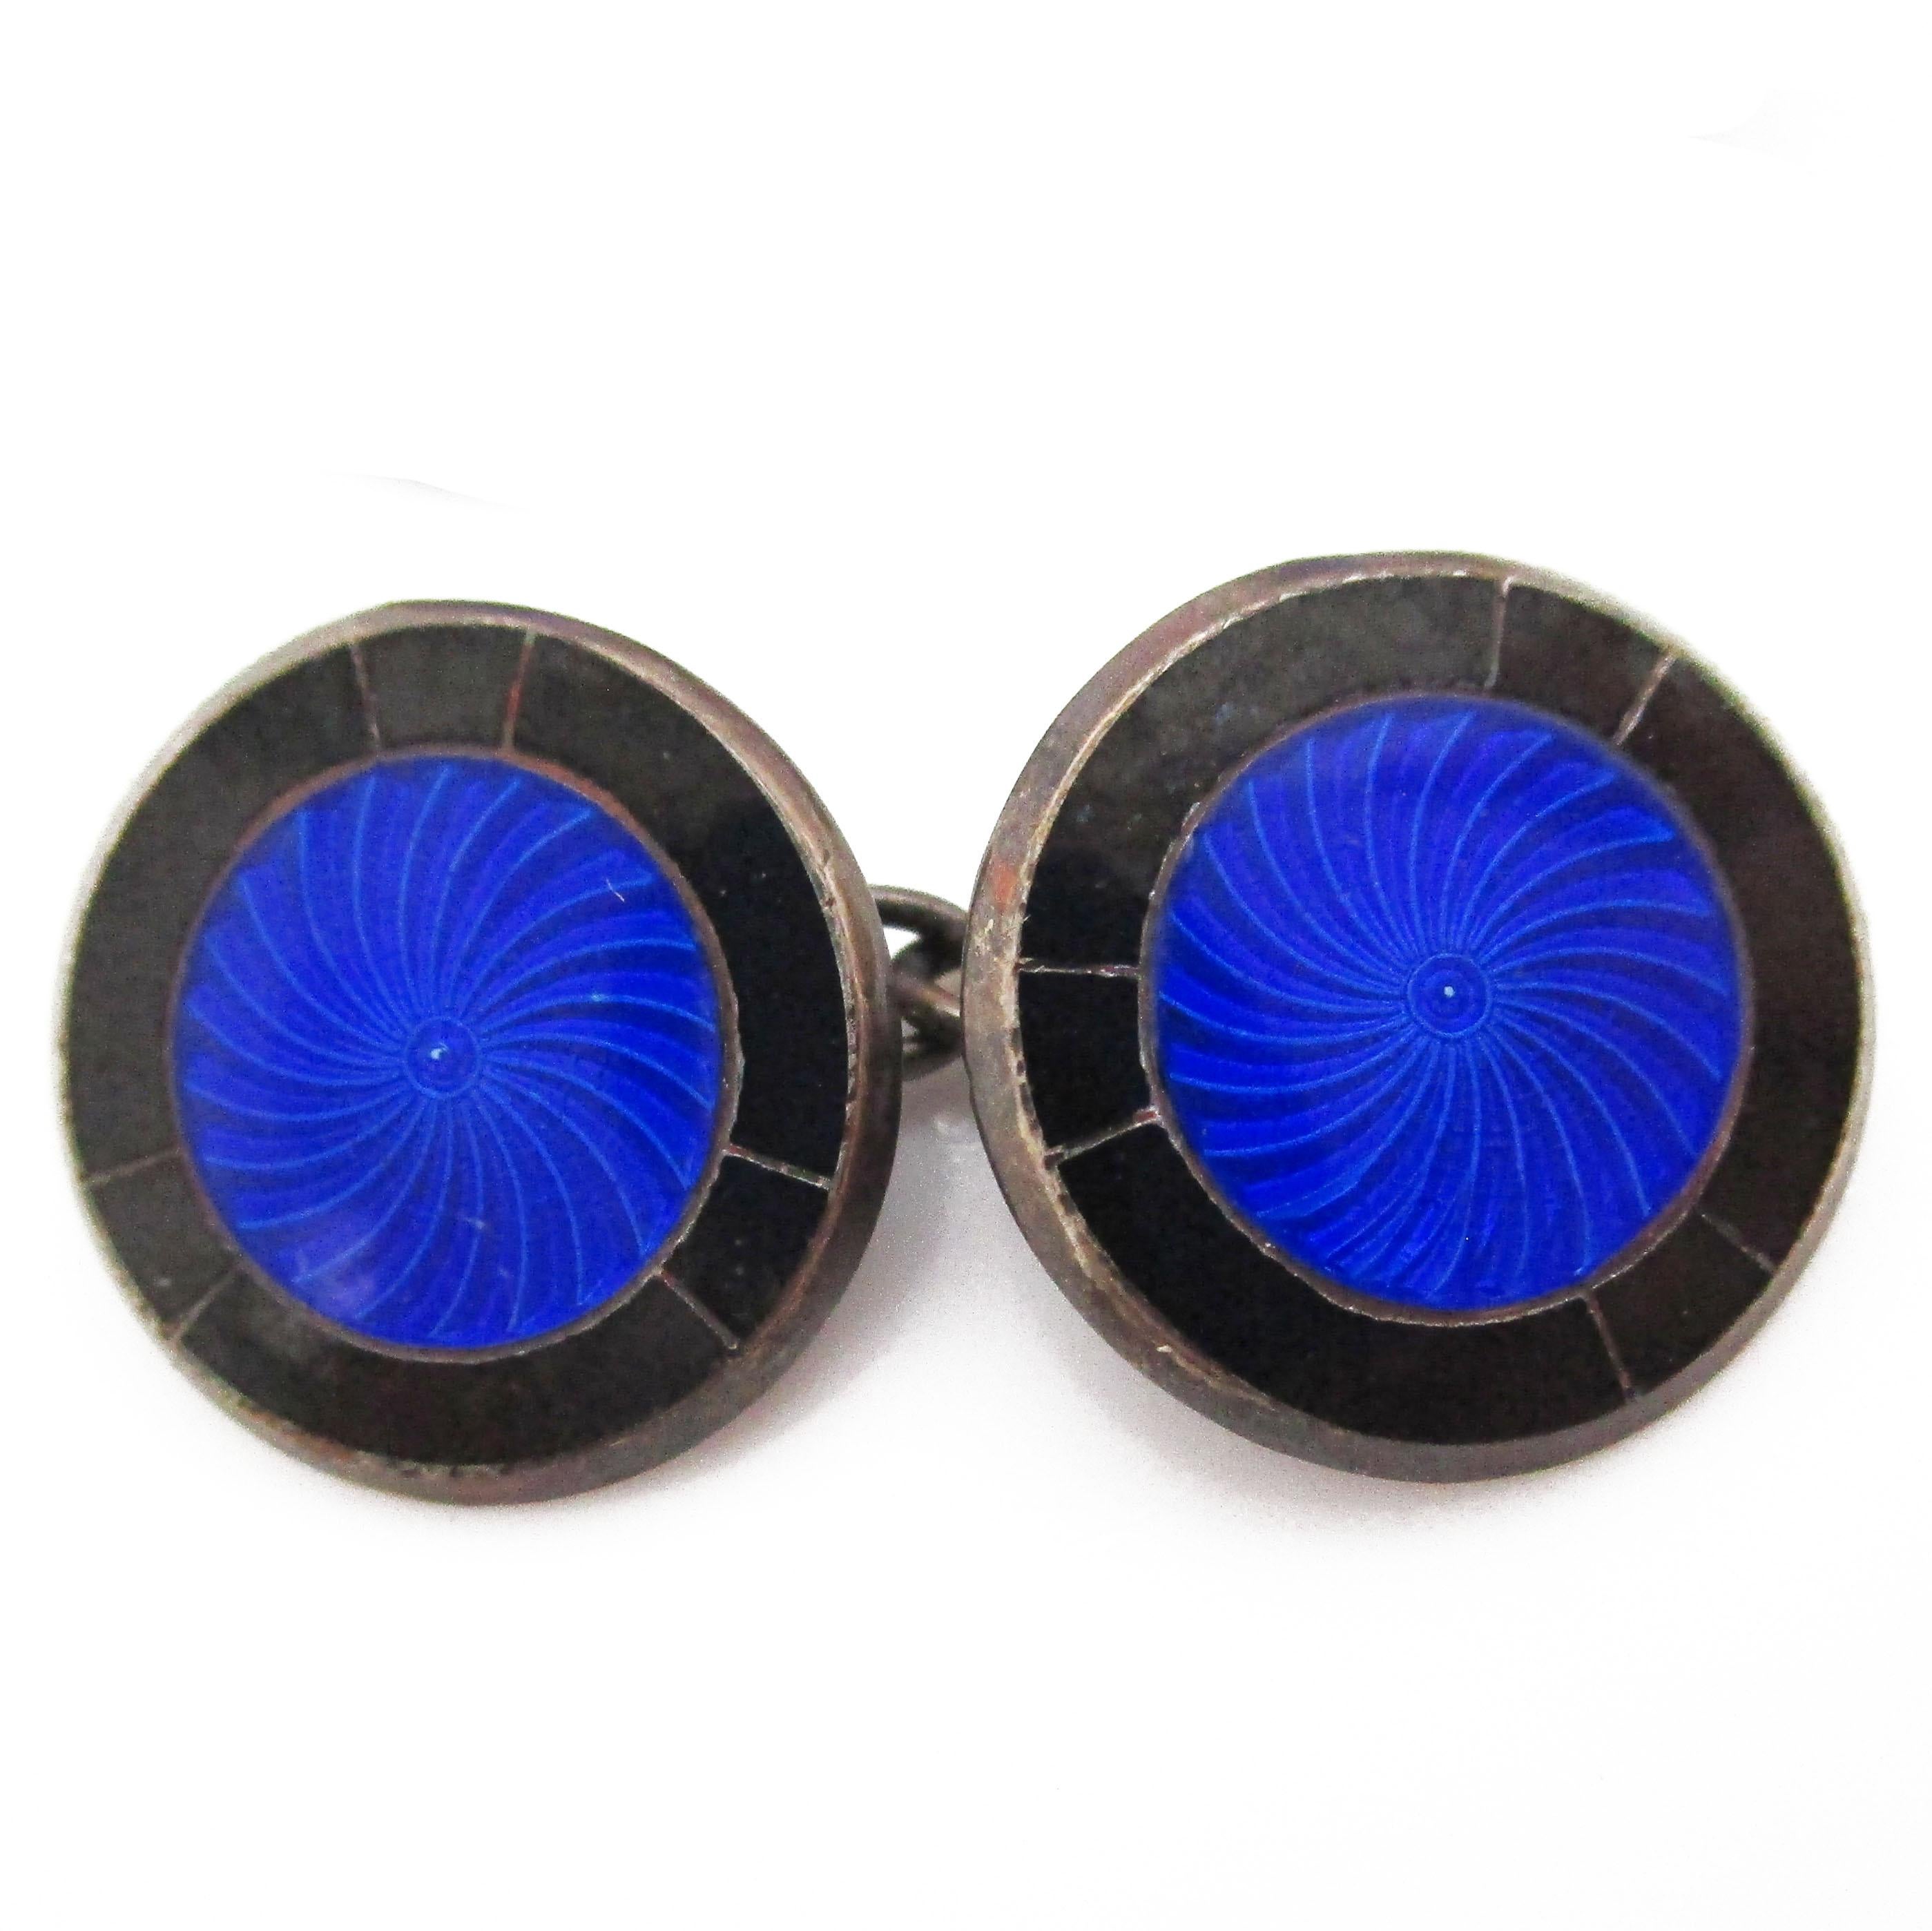 These excellent Art Deco cufflinks are from 1925 and feature a classic pairing of bright sterling silver and rich royal blue enamel. The sleek round design of the cufflinks makes them easy to wear, and the great color scheme means they will look